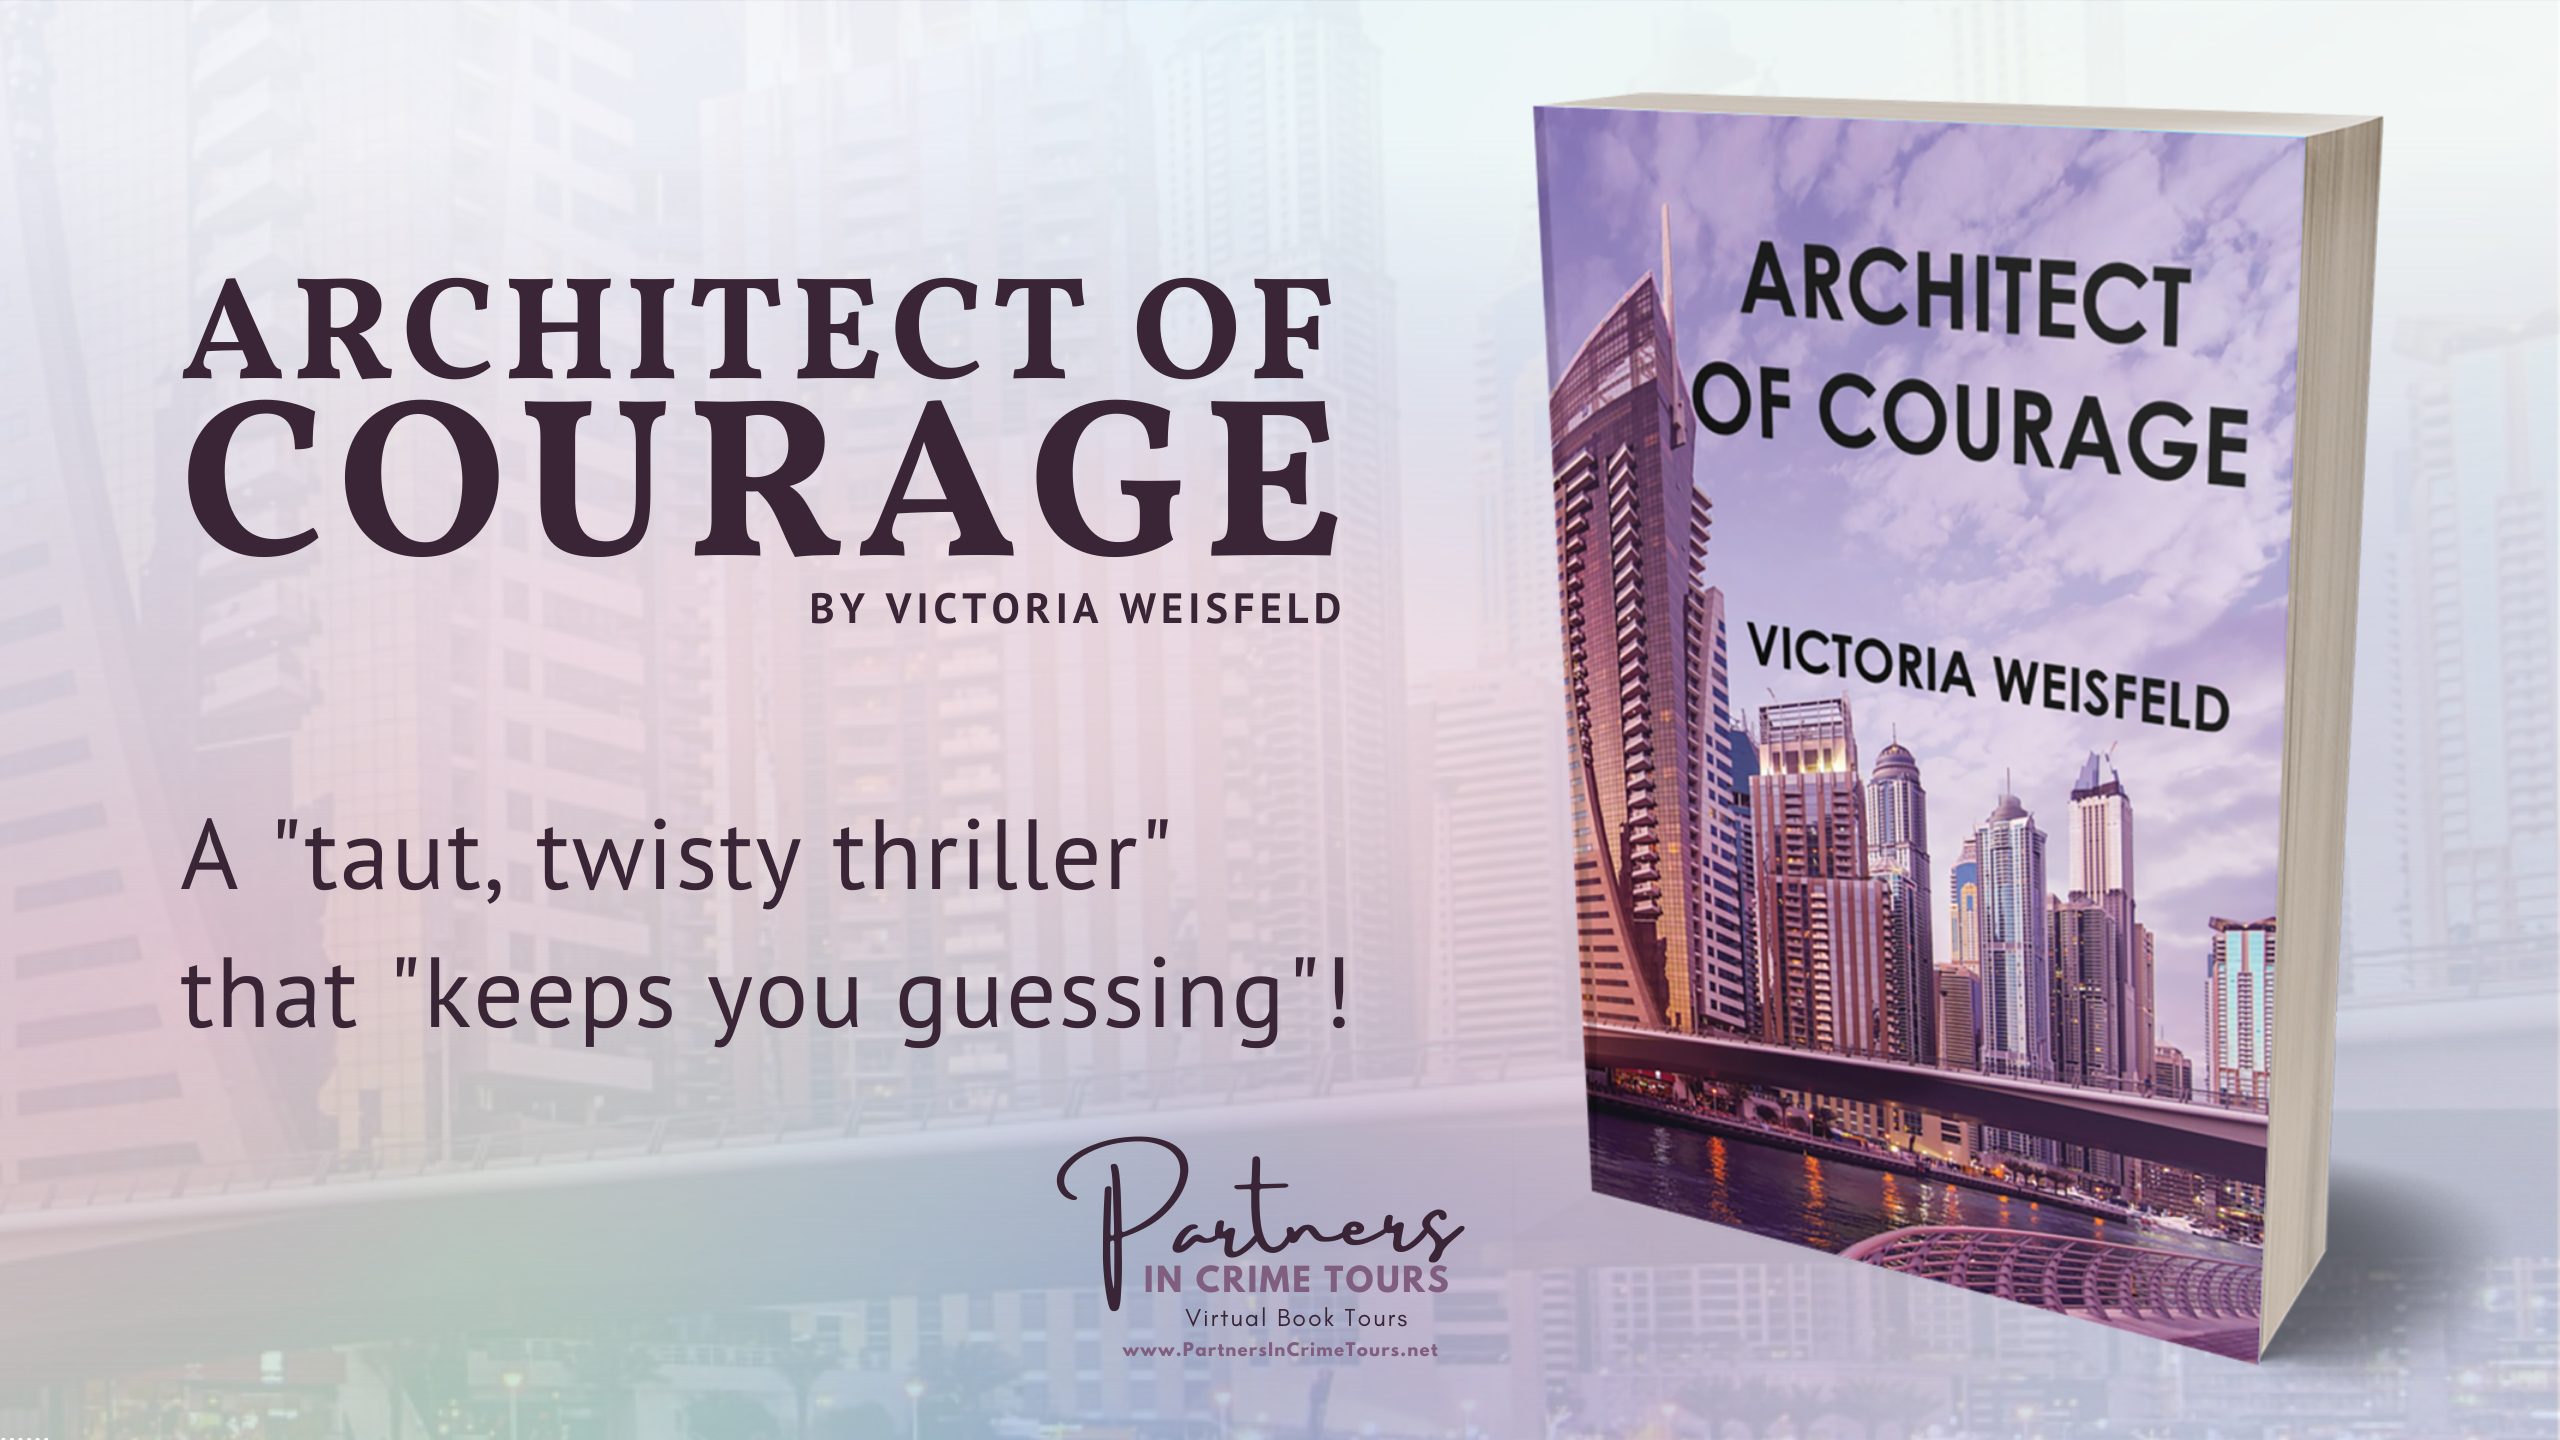 Architect of Courage by Victoria Weisfeld